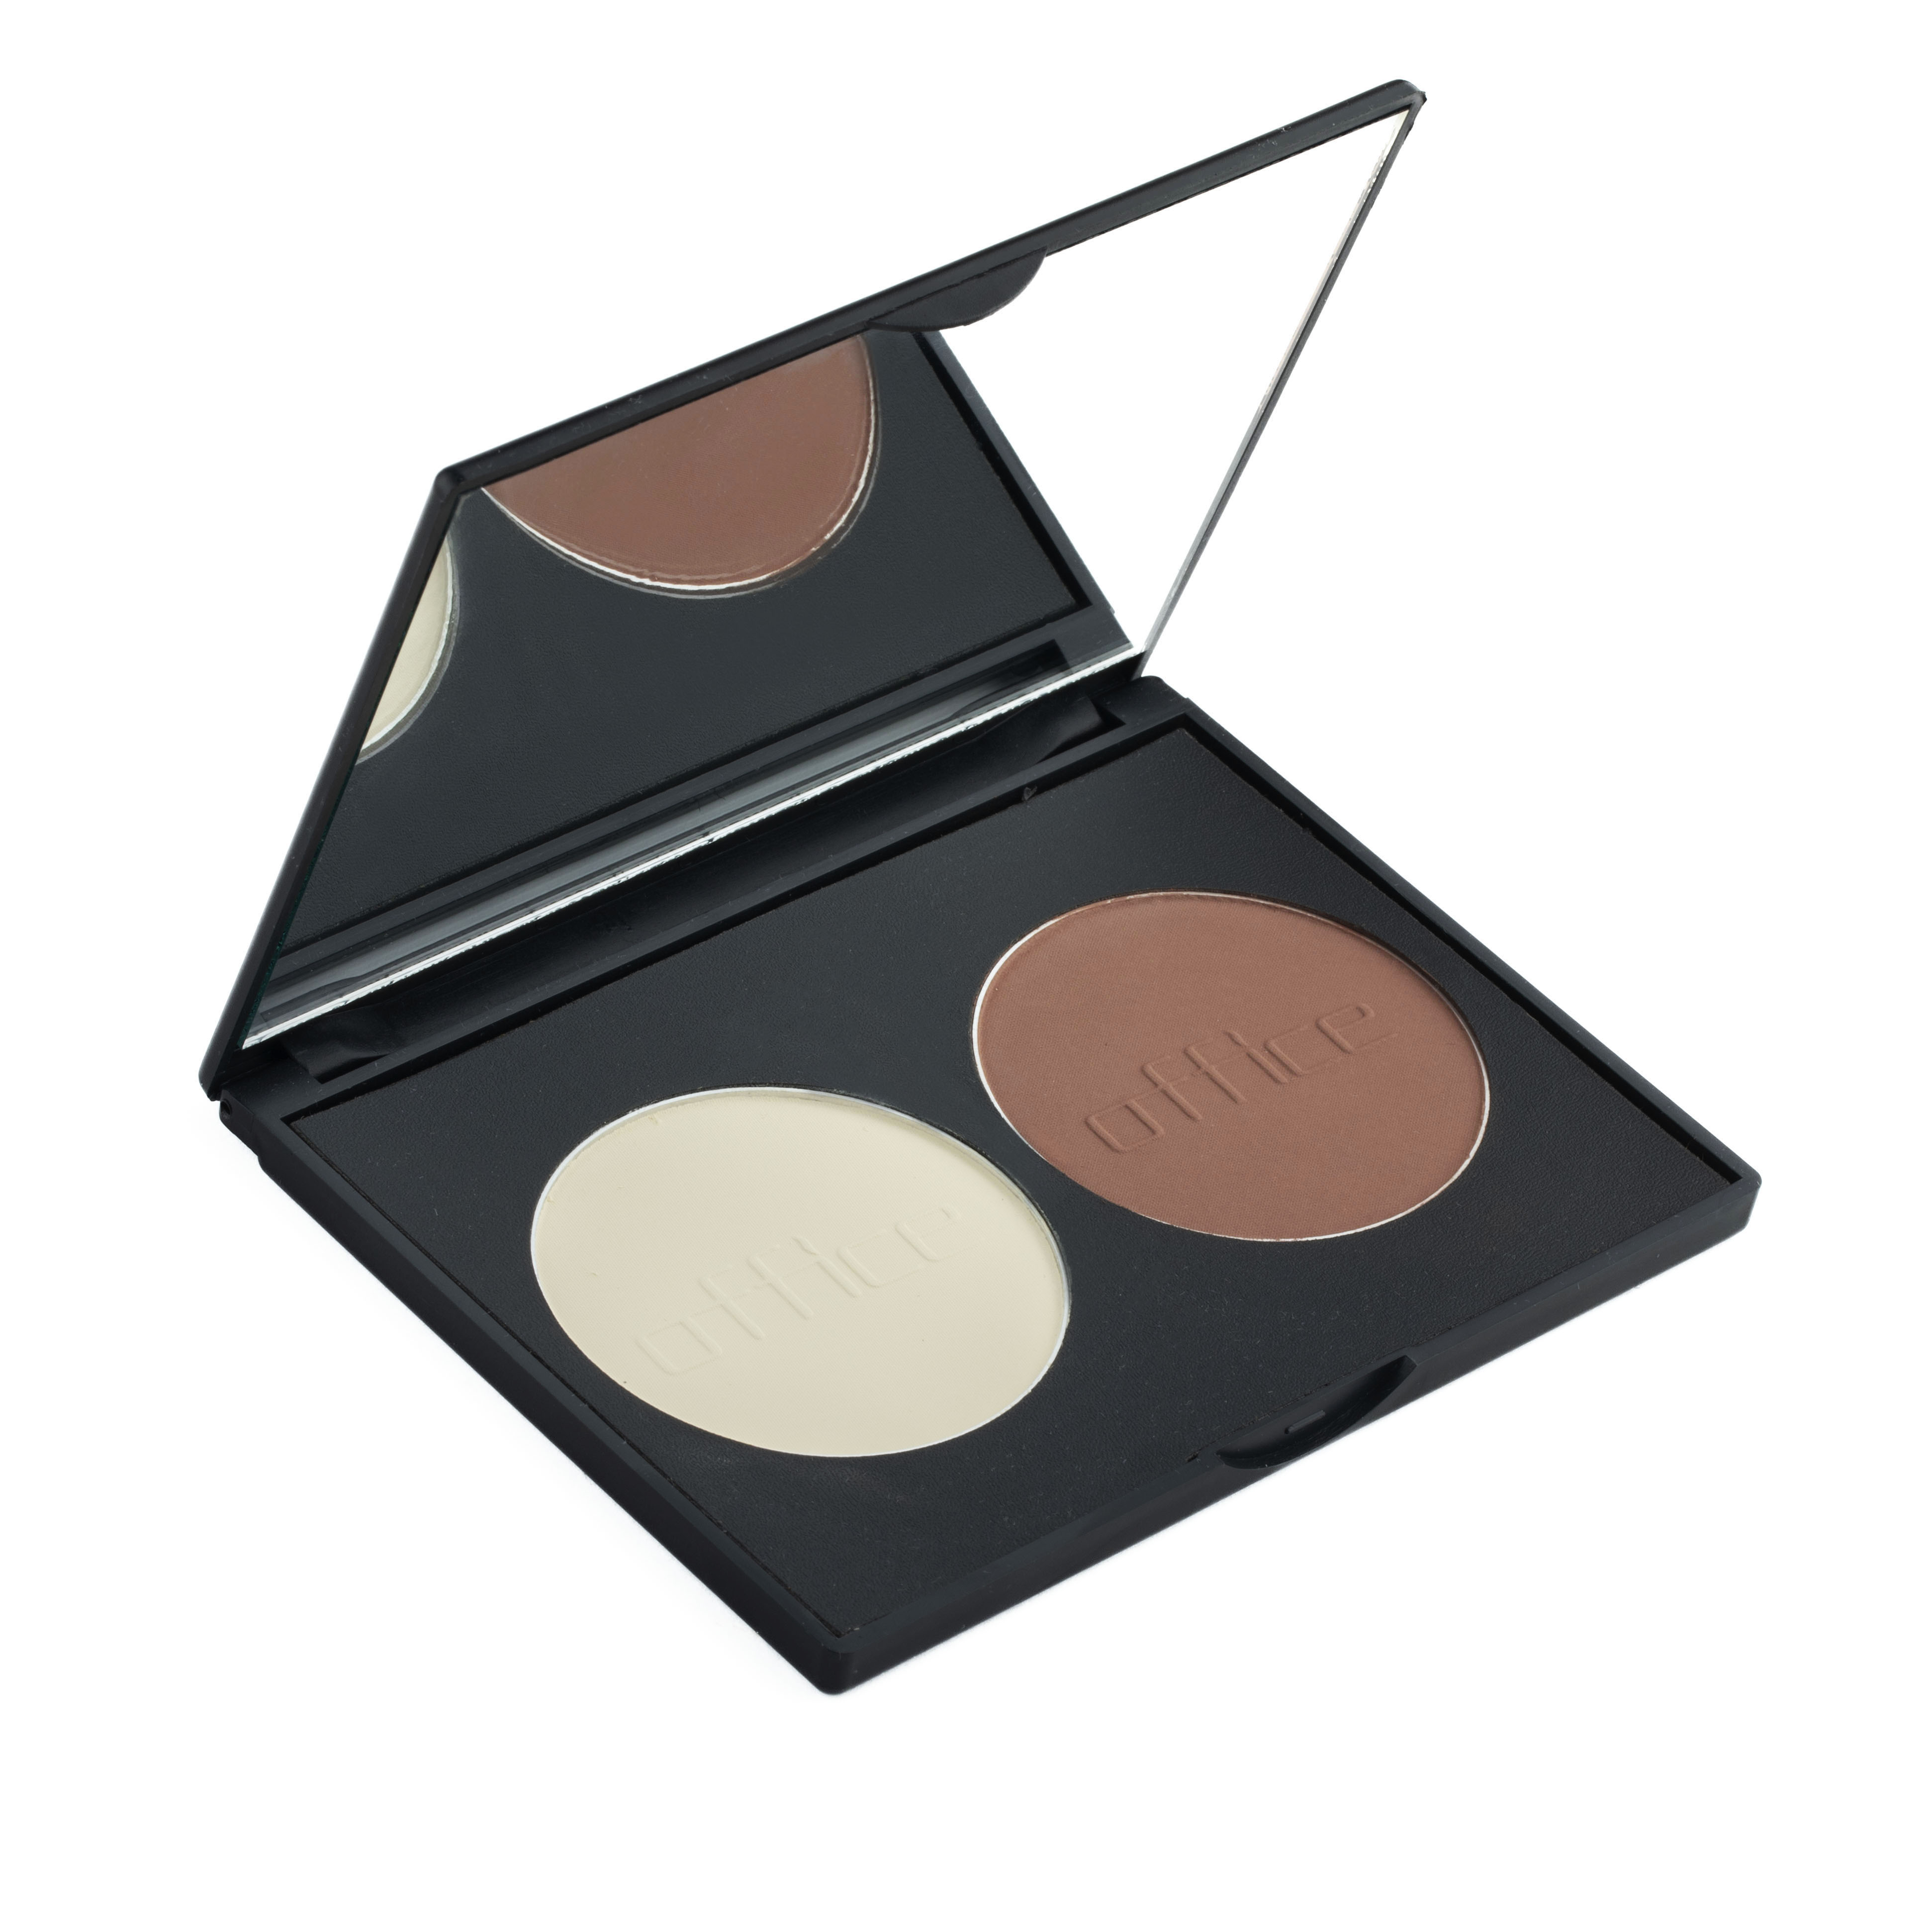 Contour Powder, Contour Palette, Natural Finish, Sheer Buildable Coverage, Sculpted Cheekbones, Girls 13 to 45